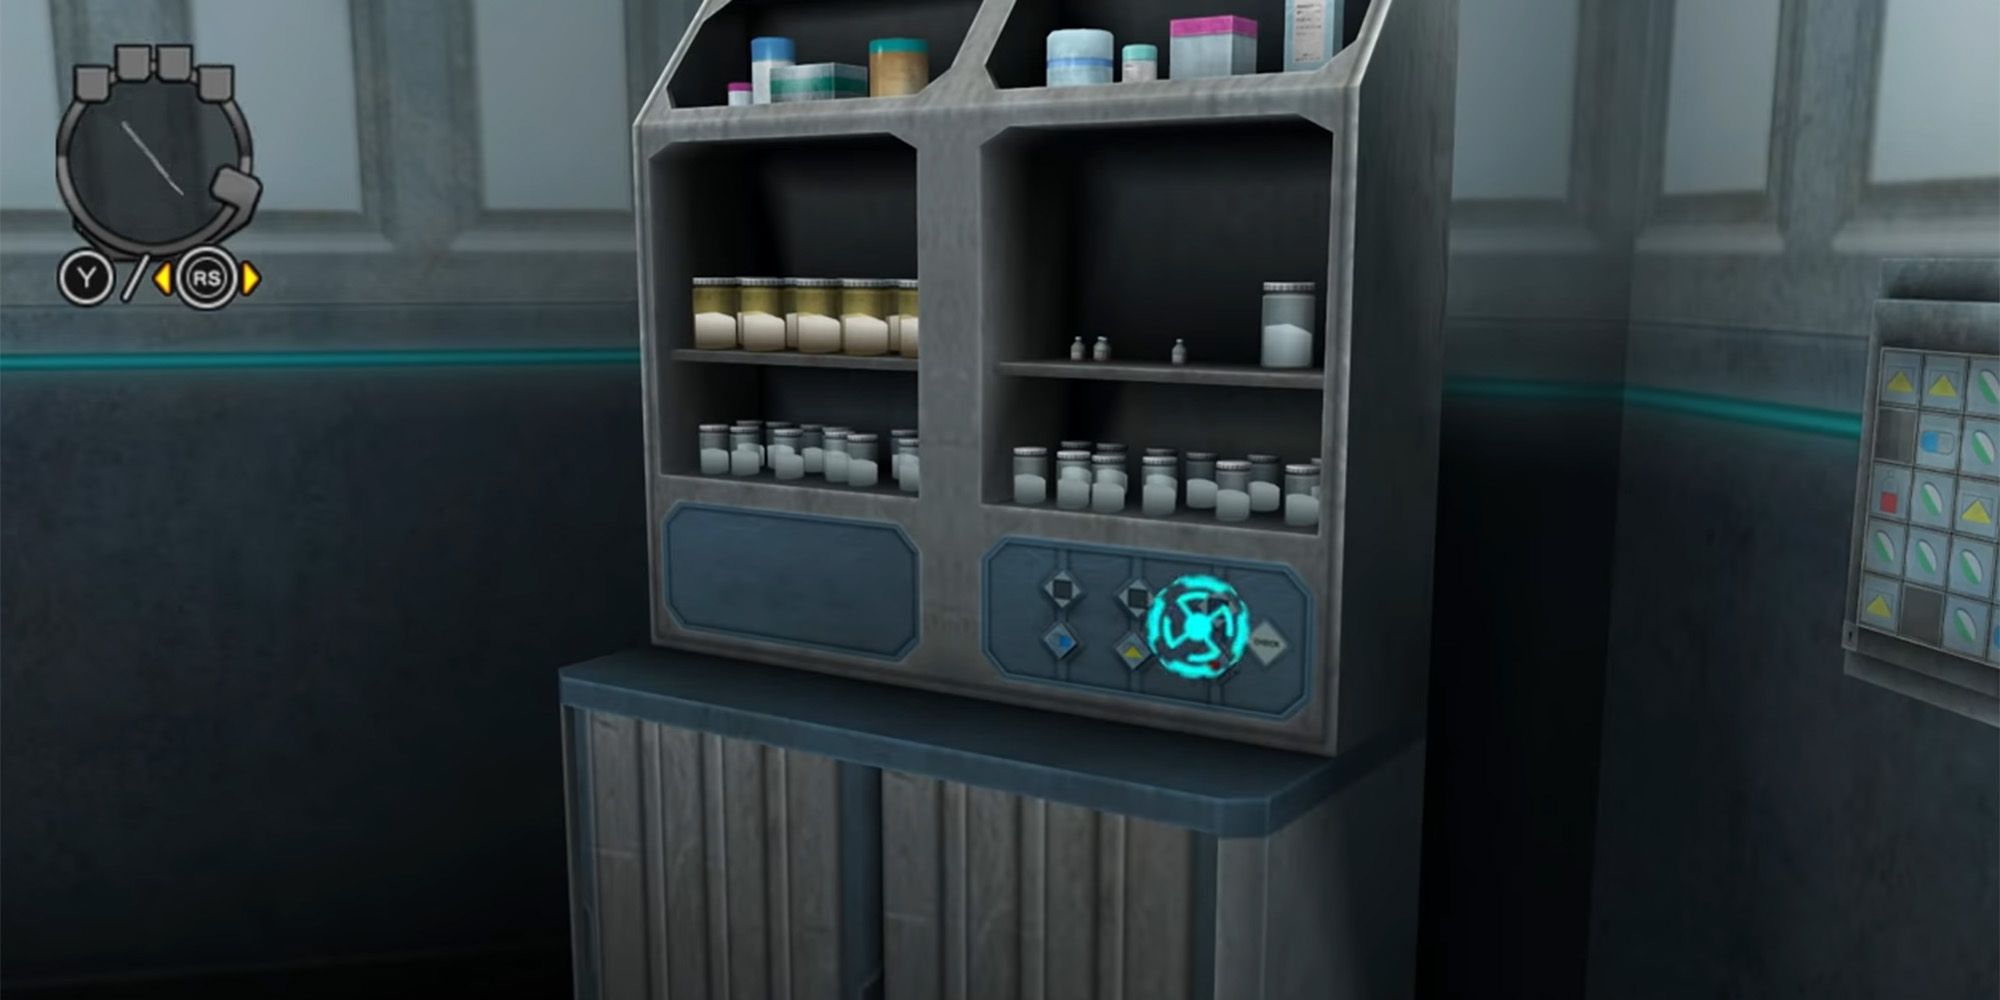 infirmary medicine cabinet stocking with medical supplies